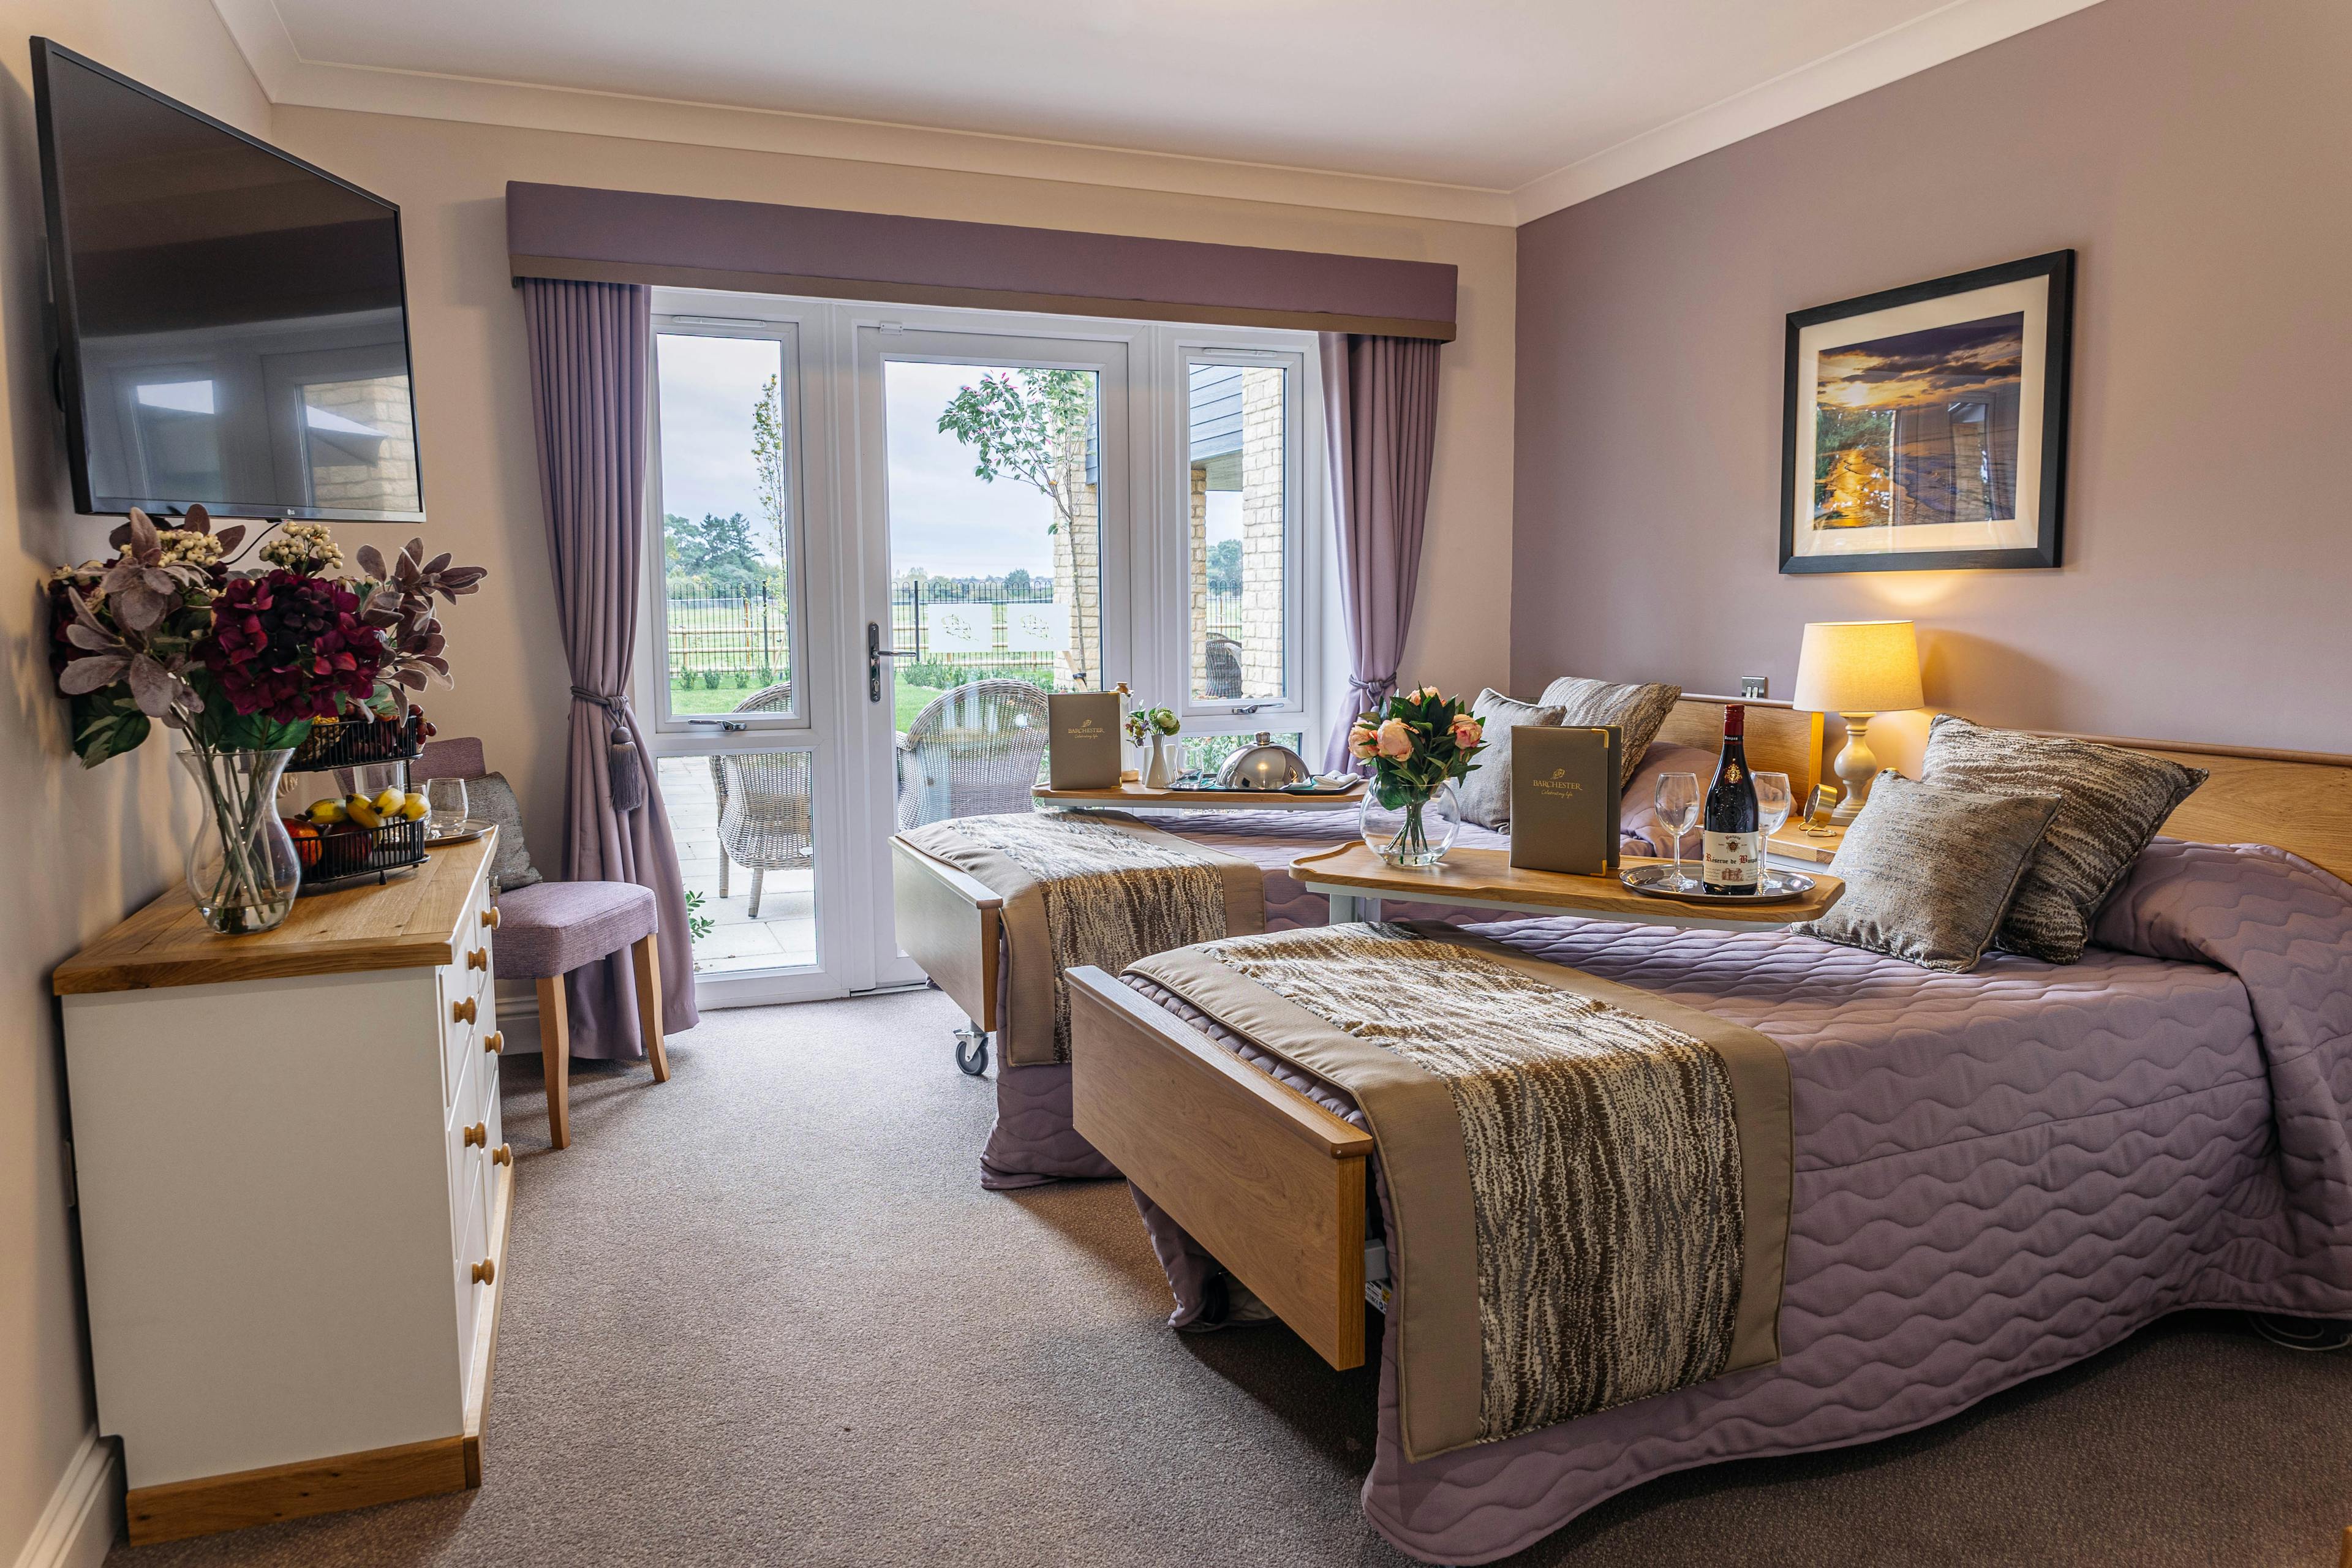 Bedroom at Parley Place Care Home in Ferndown, Dorset